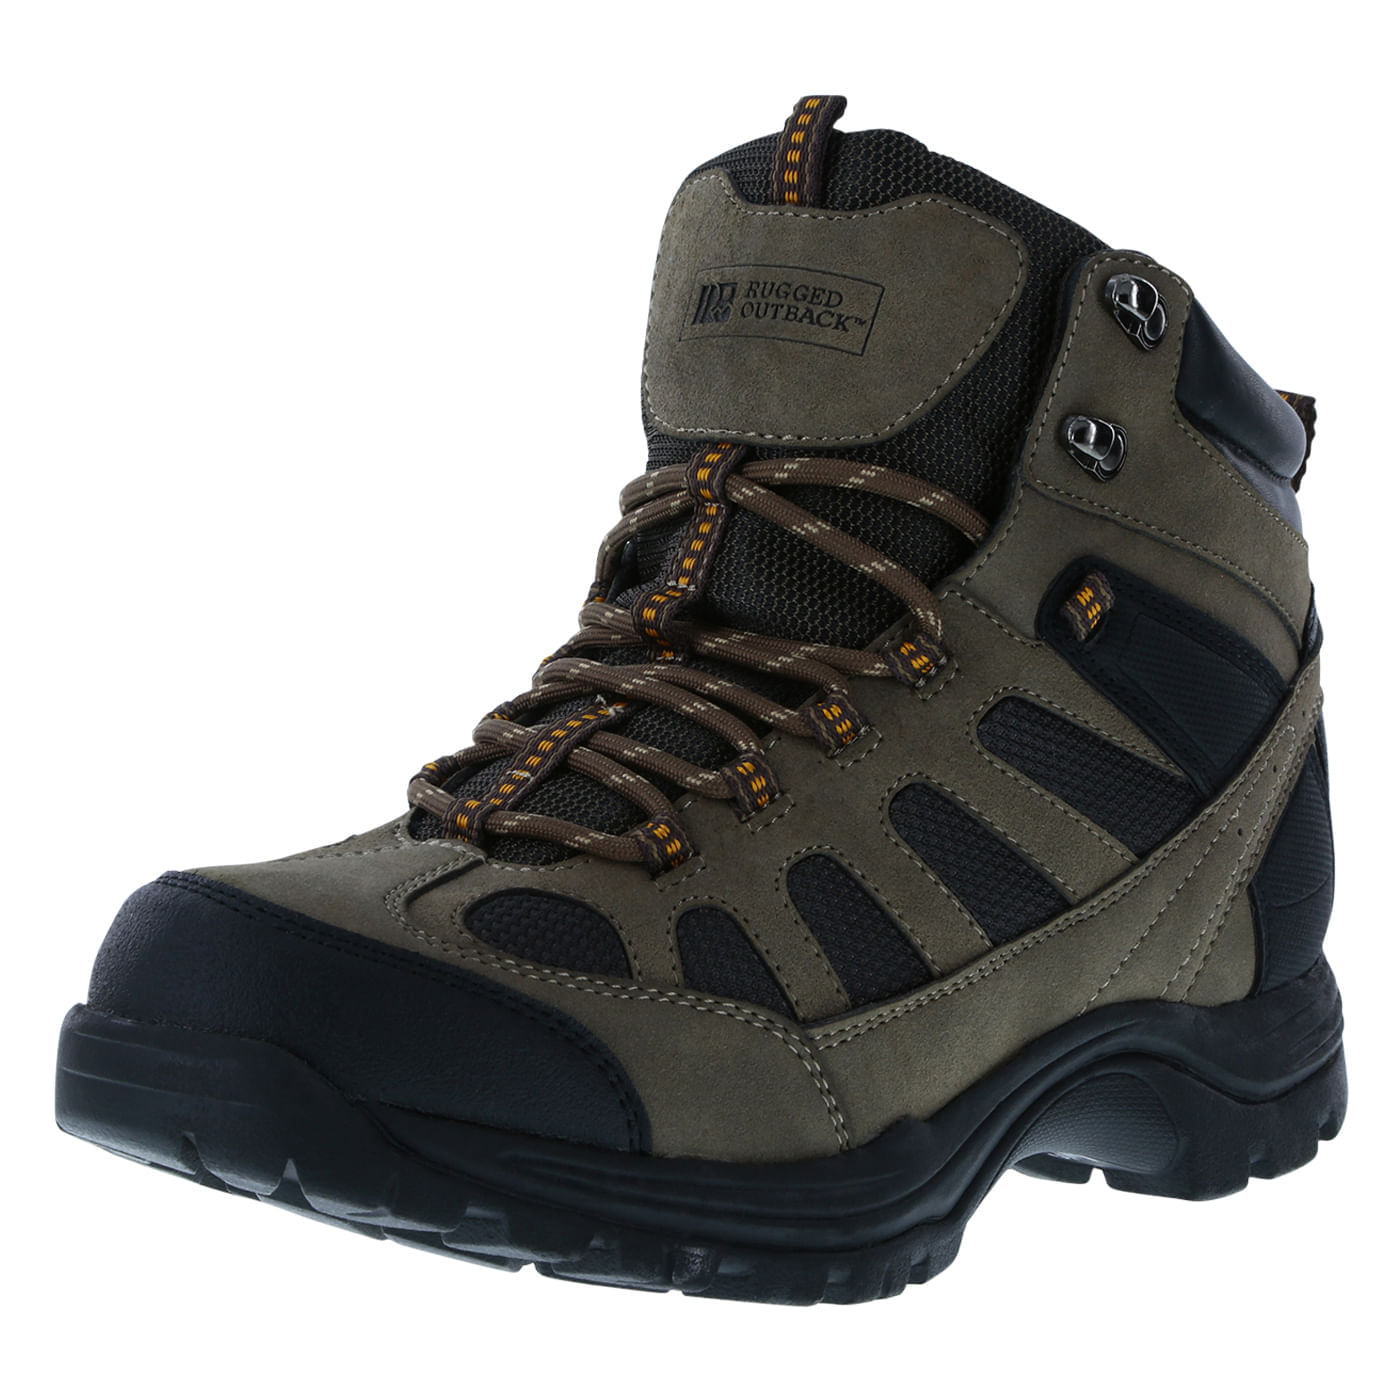 rugged outback men's boots